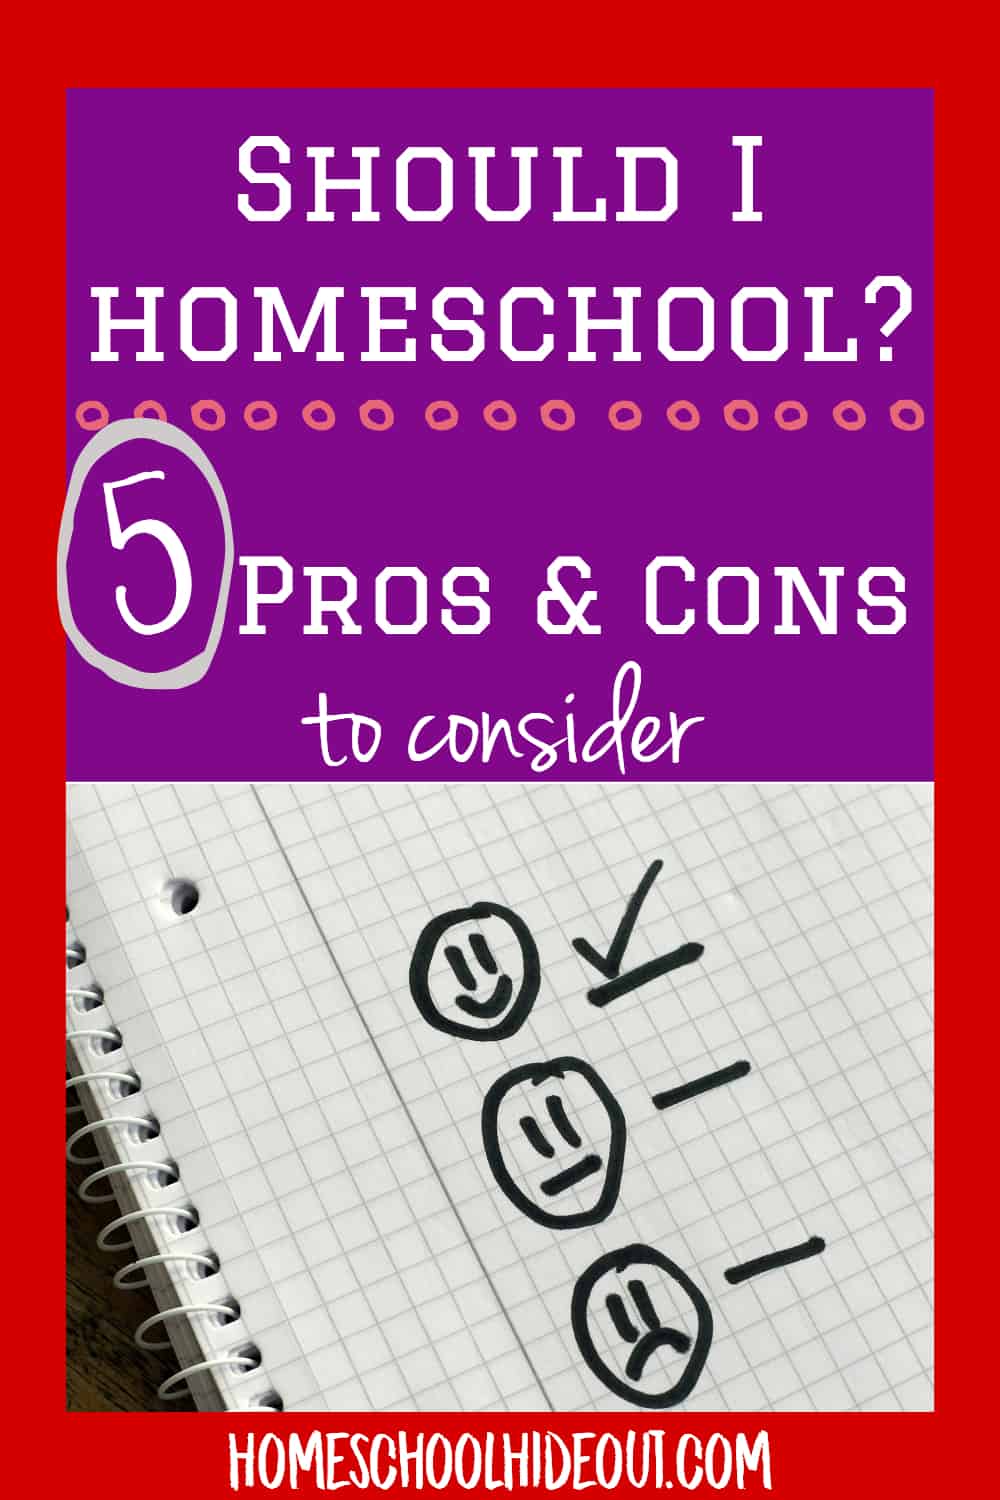 Homeschooling is a huge decision that you shouldn't take lightly. Check out the 5 biggest pros and cons of homeschooling! #homeschool #homeschooling #prosandcons #shouldihomeschool